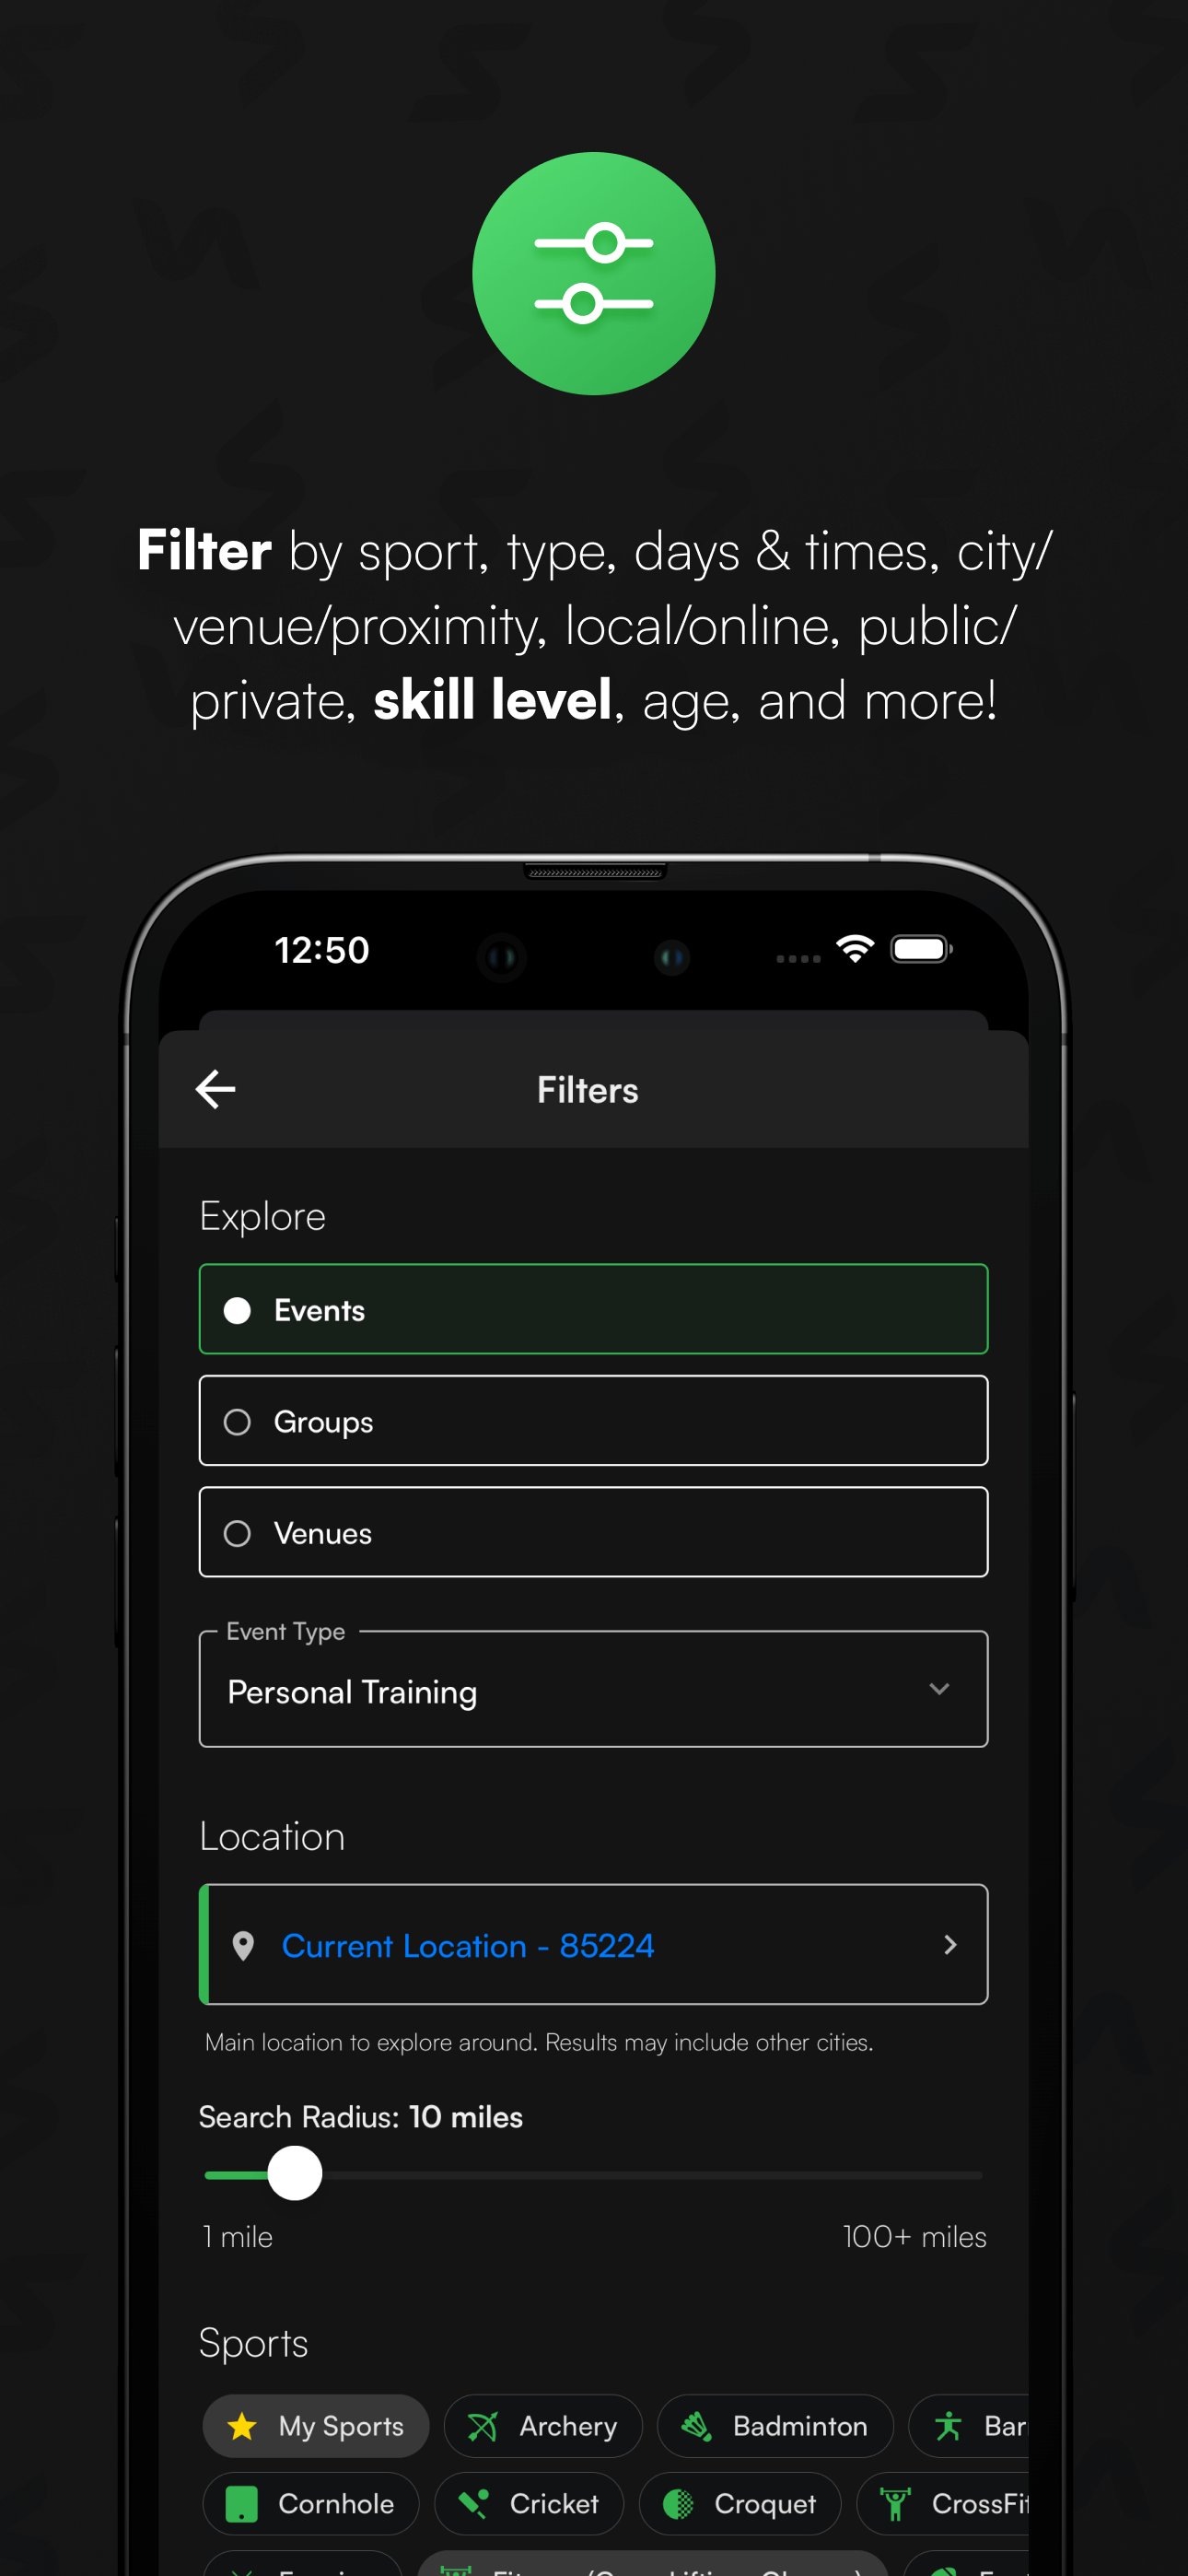 Filter by Sport, Group/Event Type, Skill Level, City/Venue/Proximity, Search Radius, Day/Time, and More